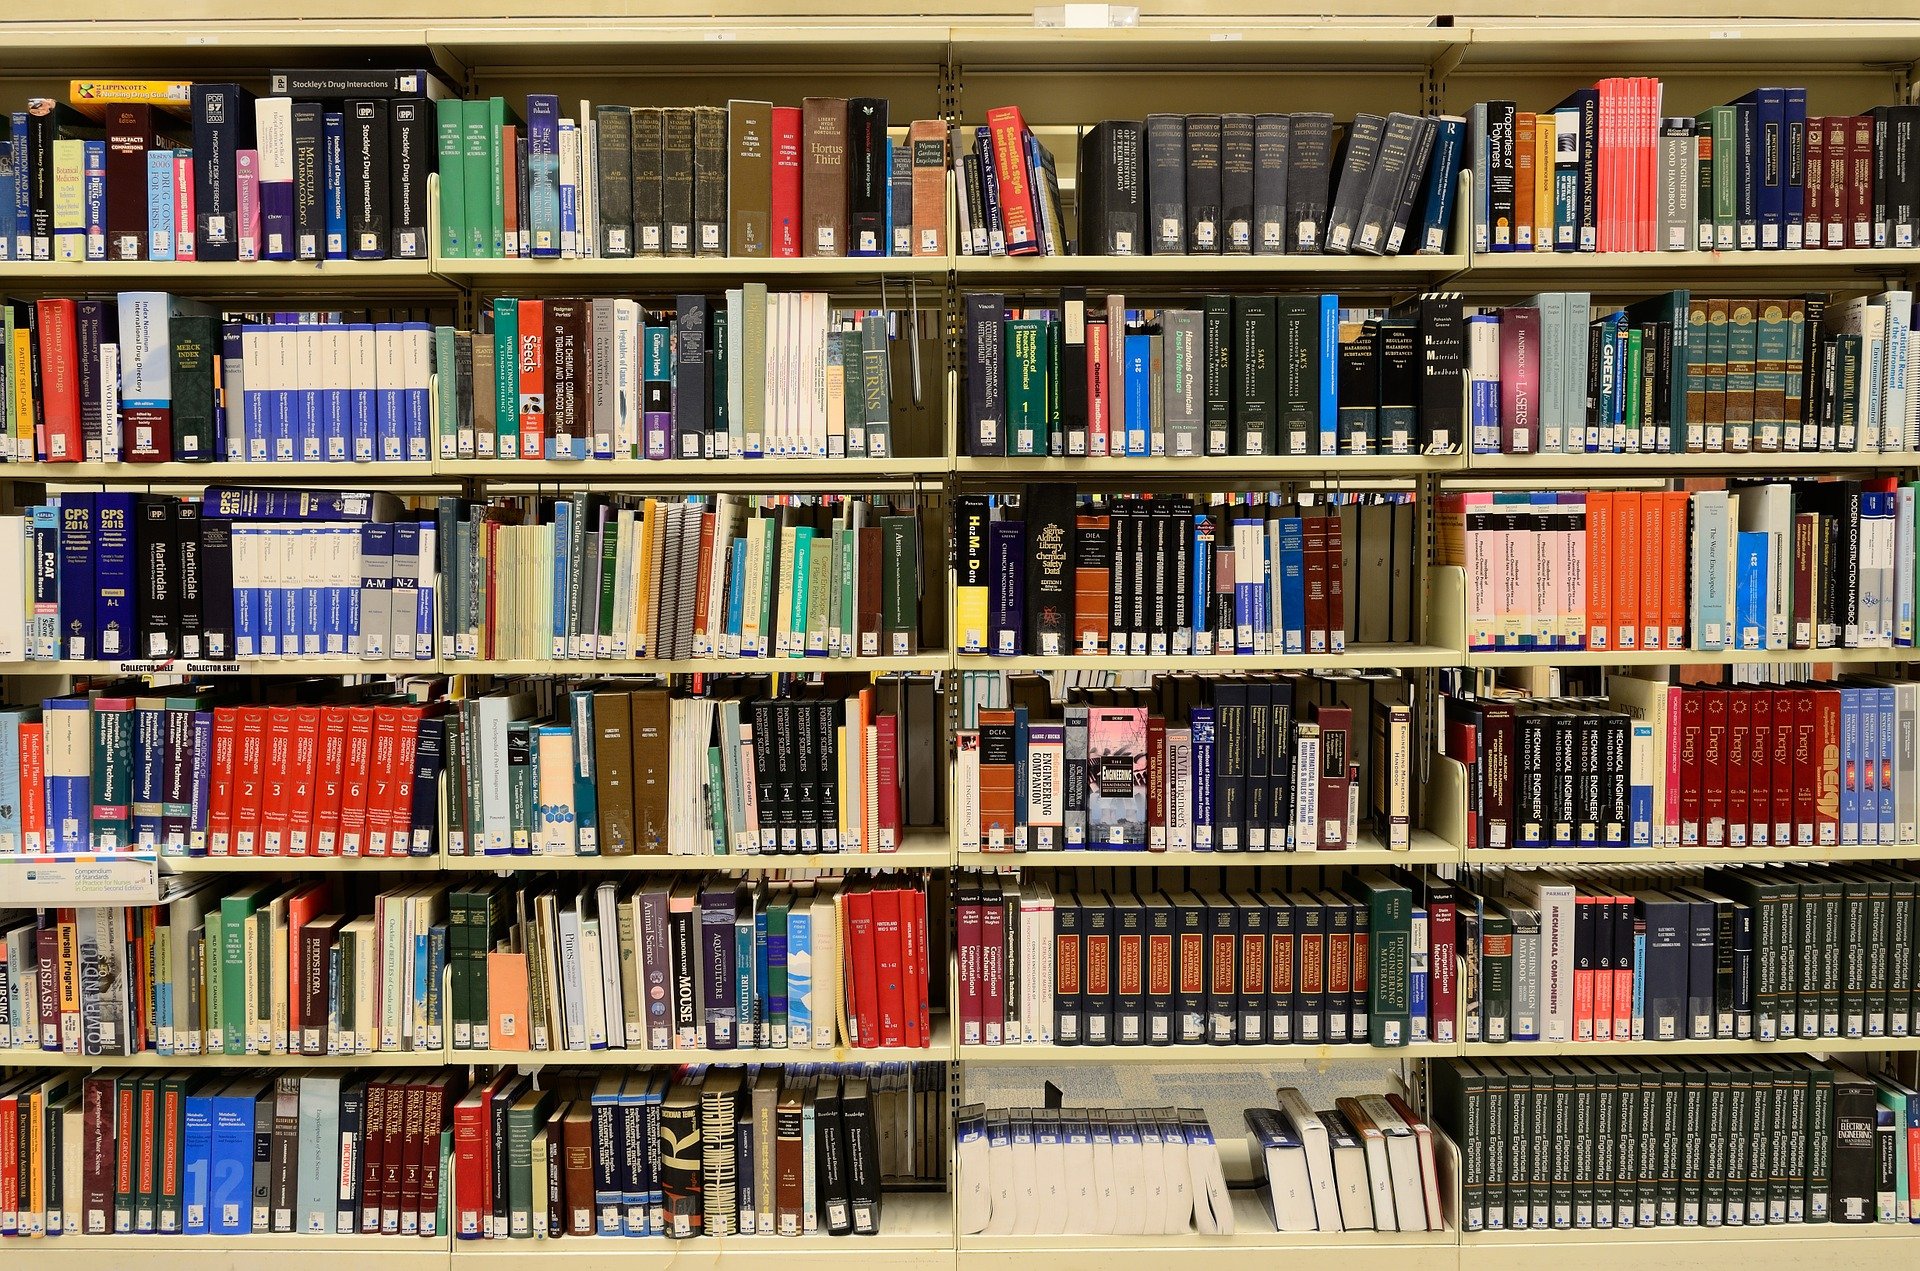 Pictured - Books stacked up on shelves in the library | Source: Pixabay